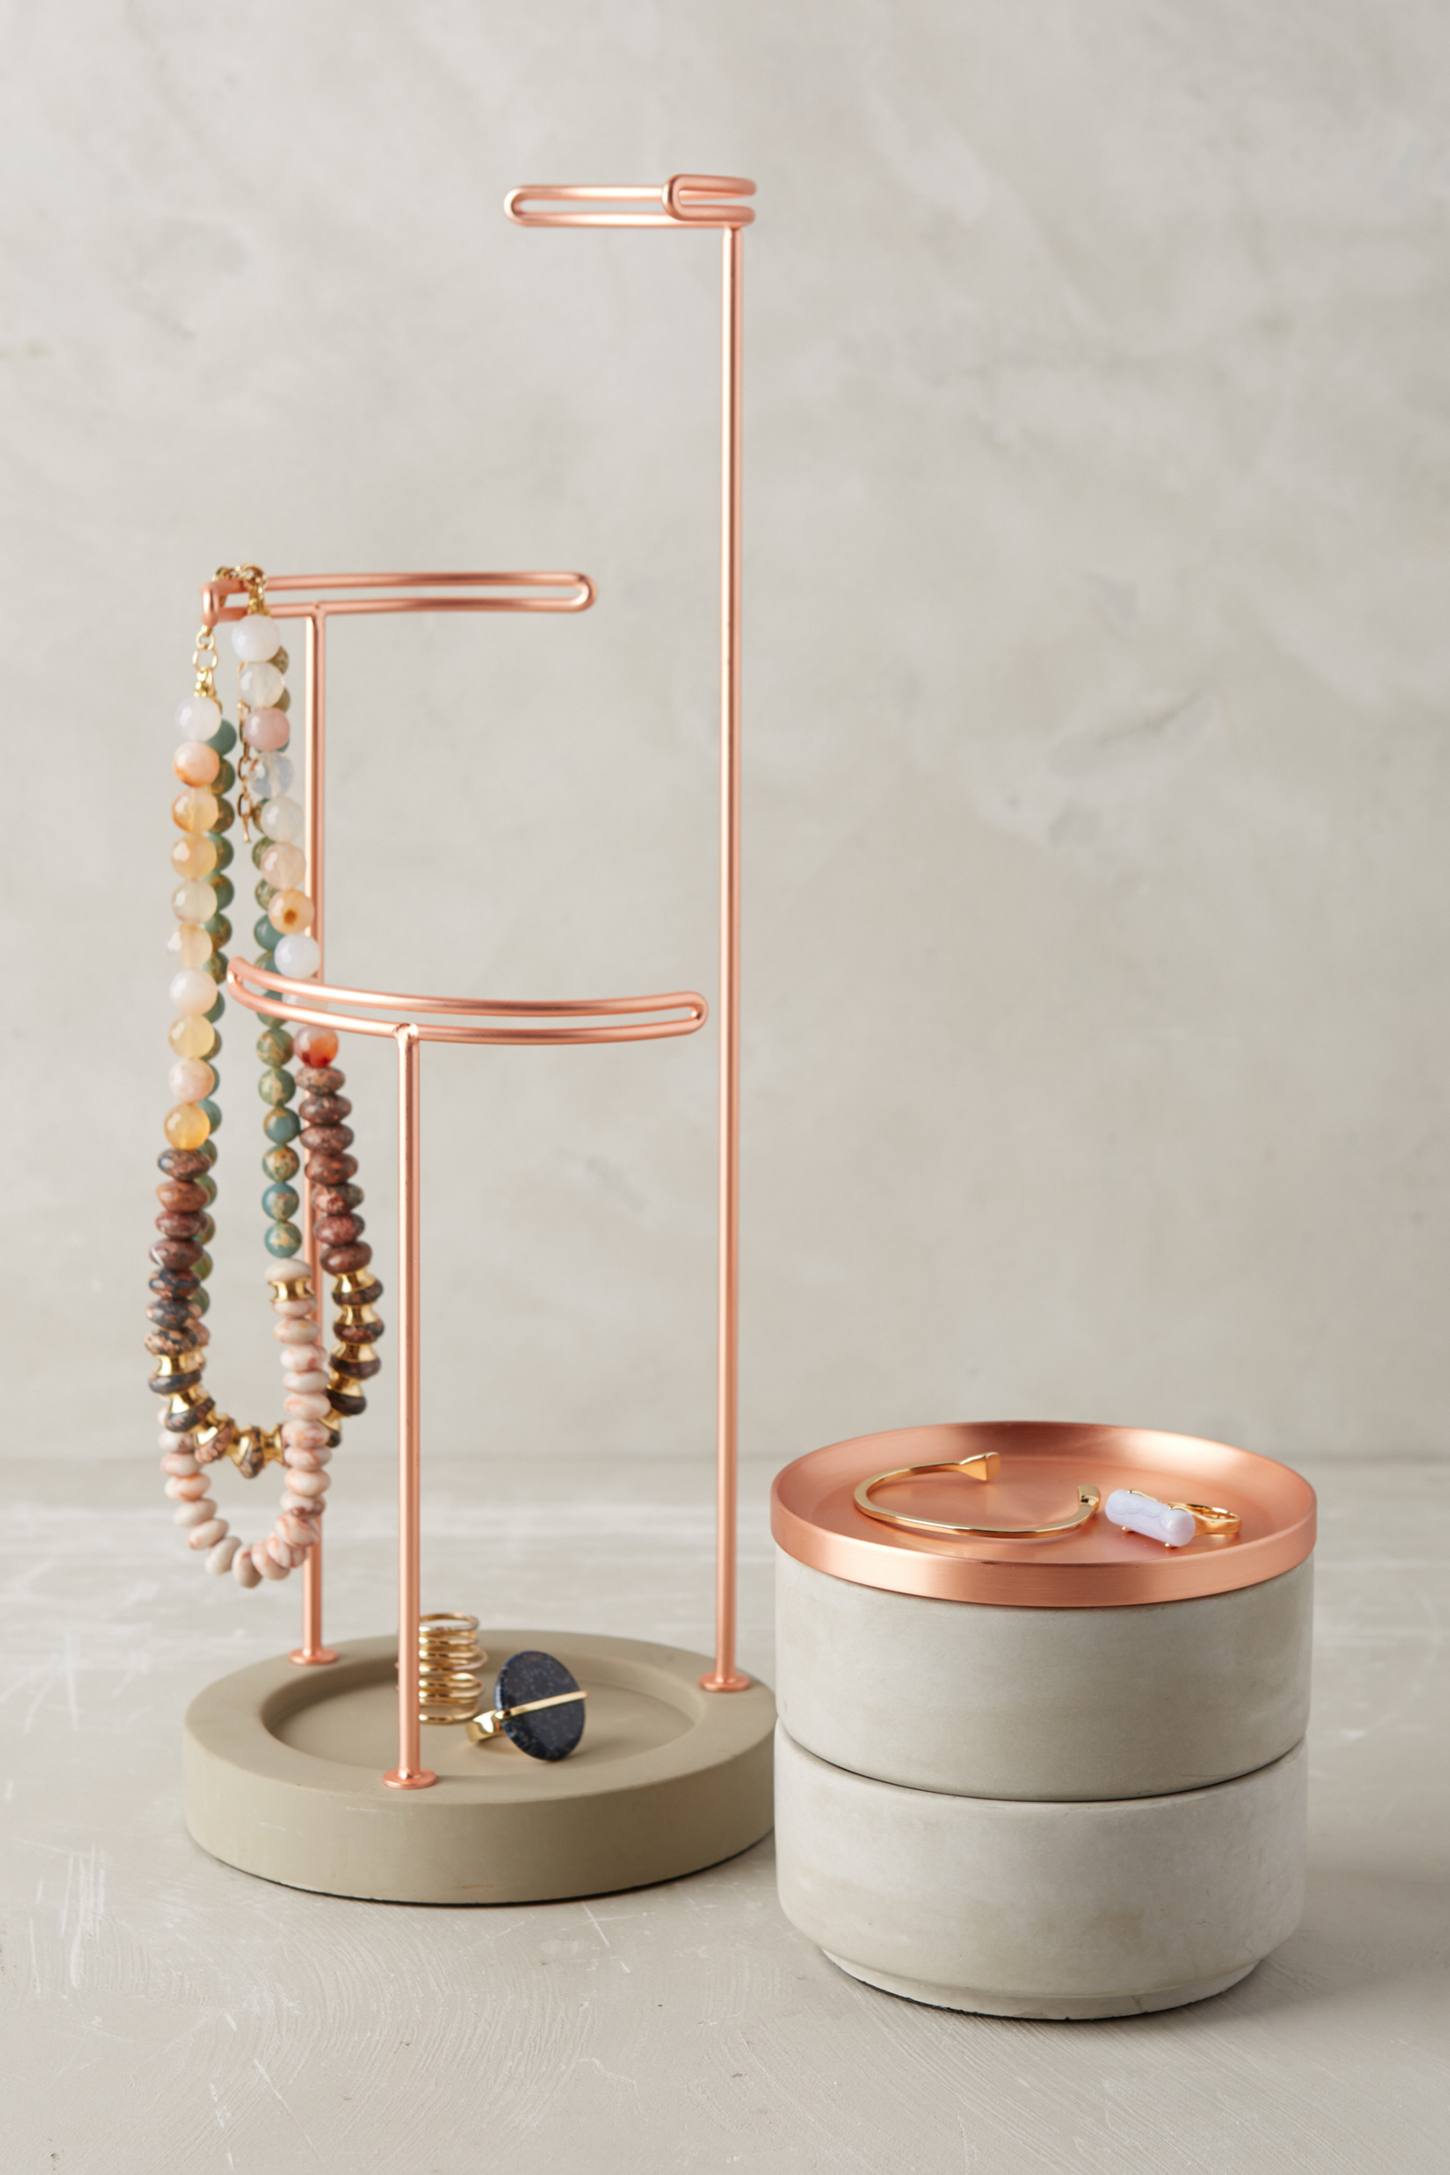 Tesora Jewelry Storage Collection by Sung Wook Park for Umbra